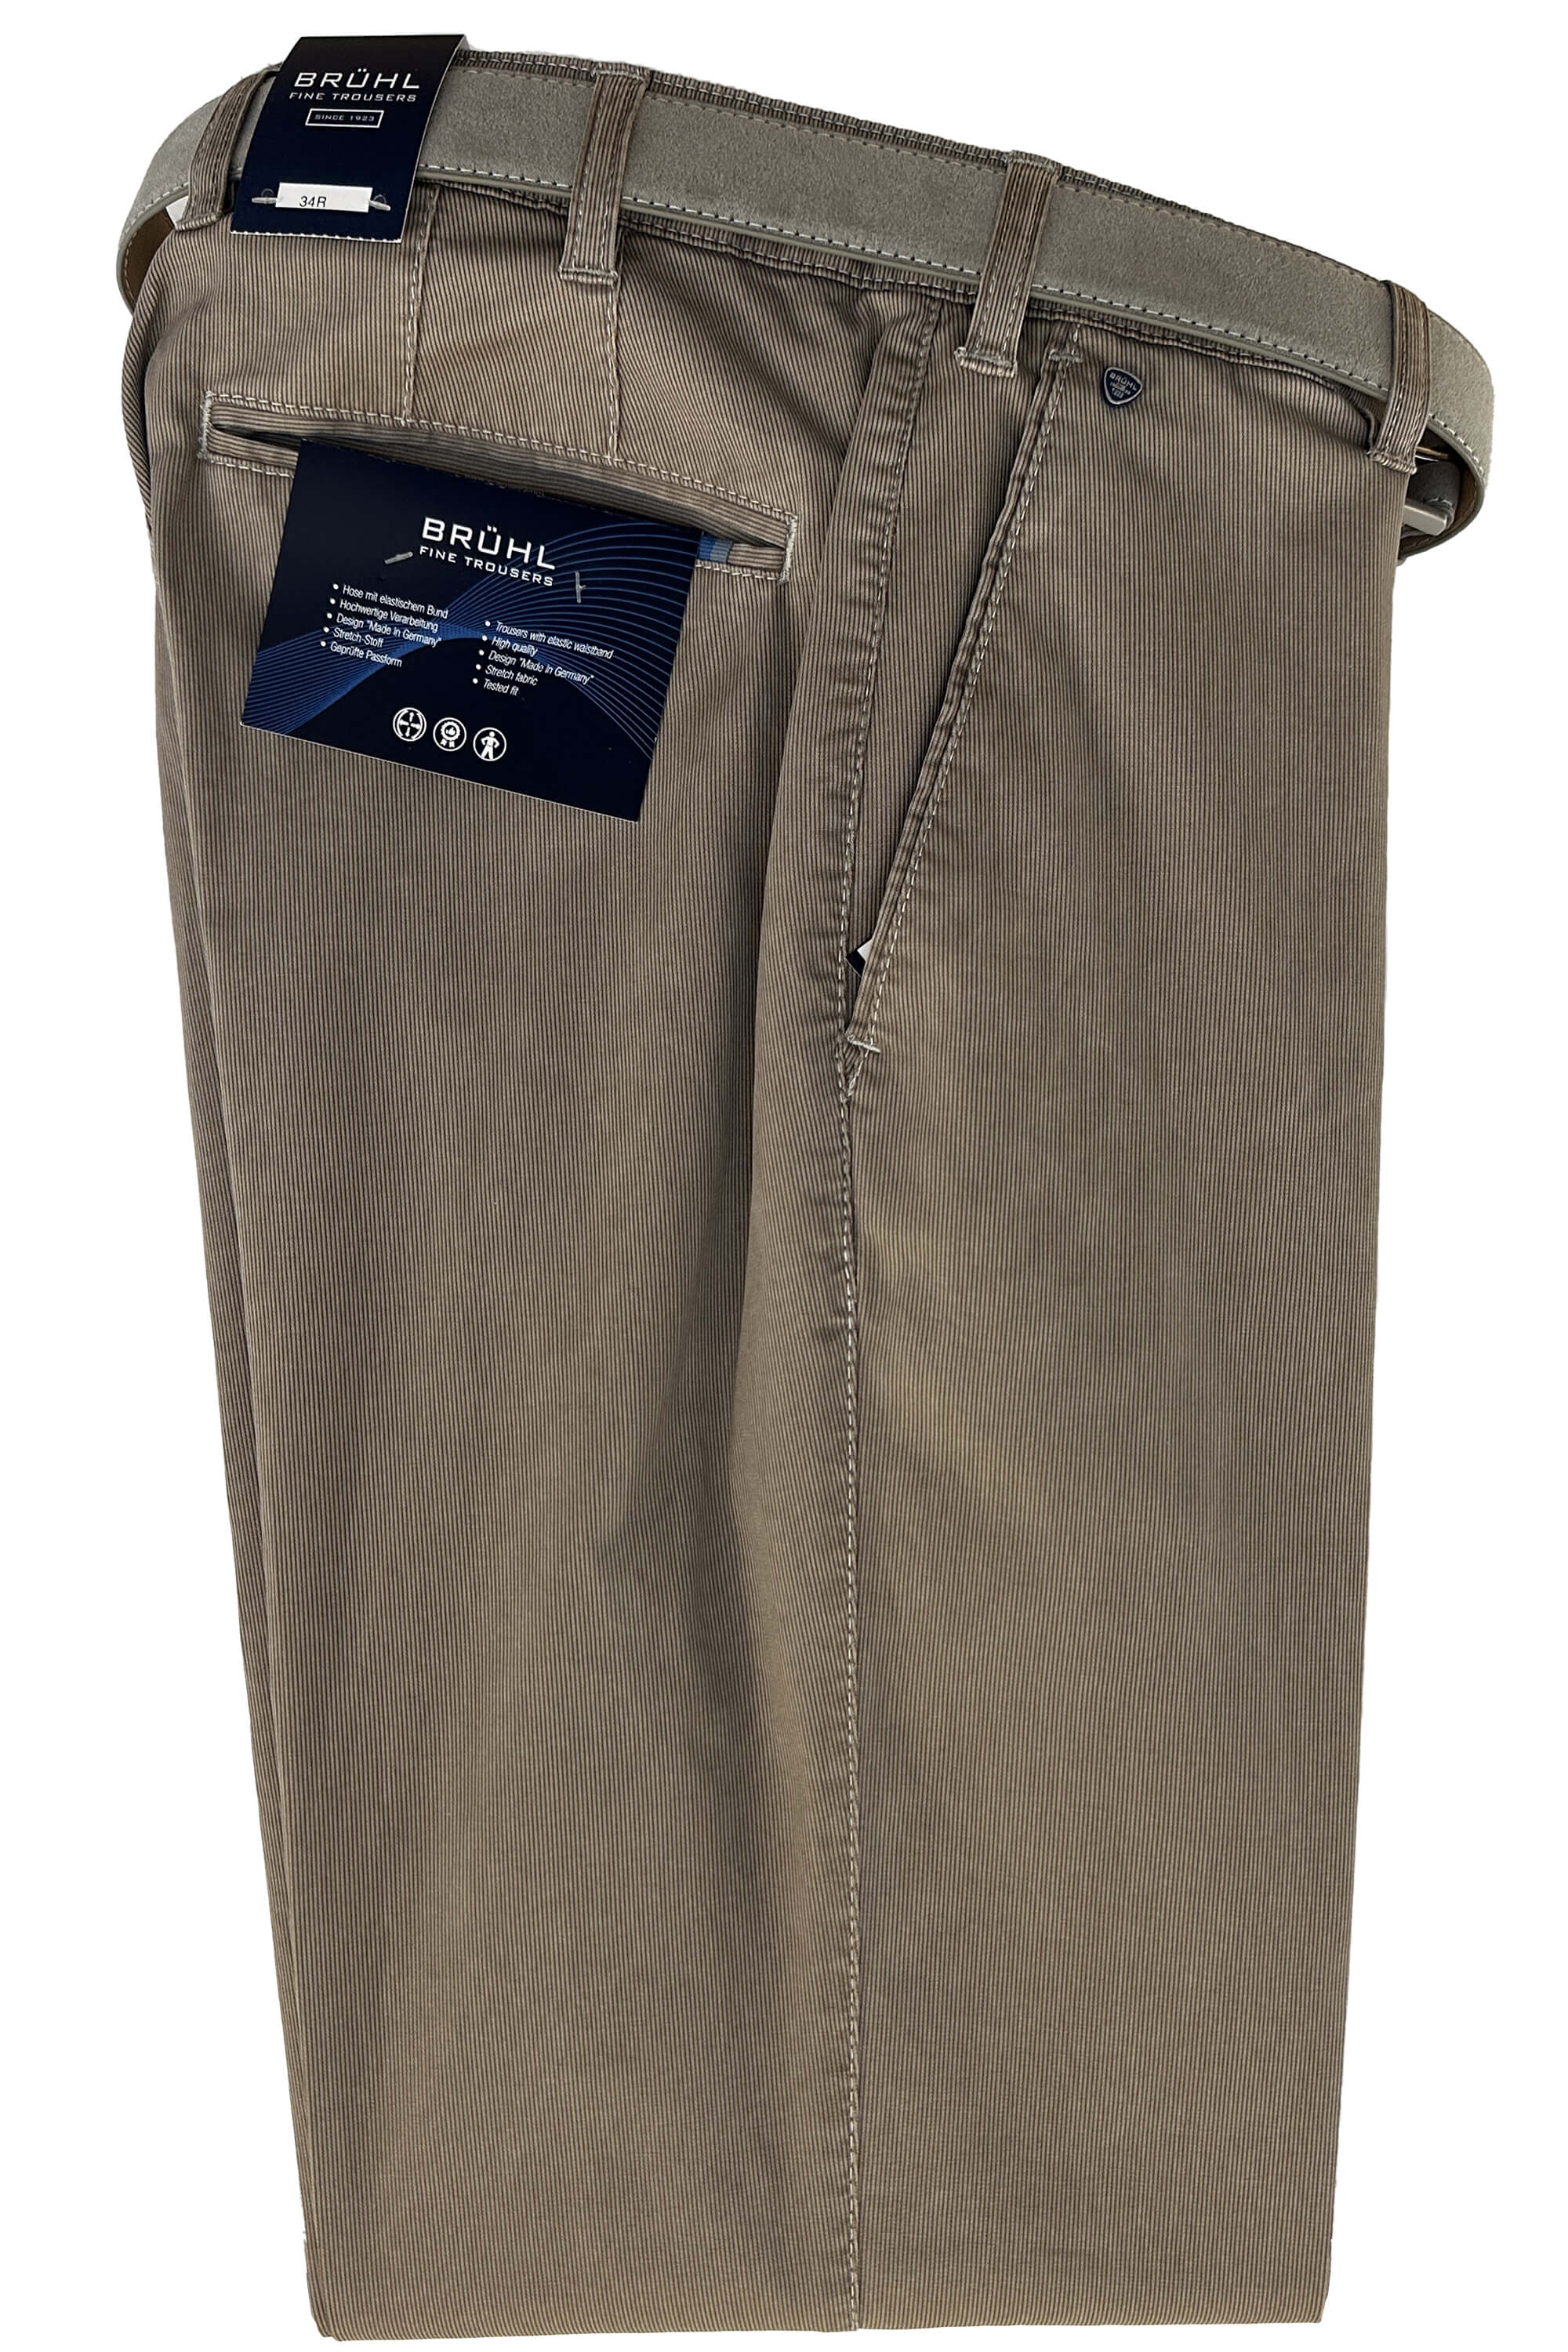 Bruhl Parma Putty Trousers